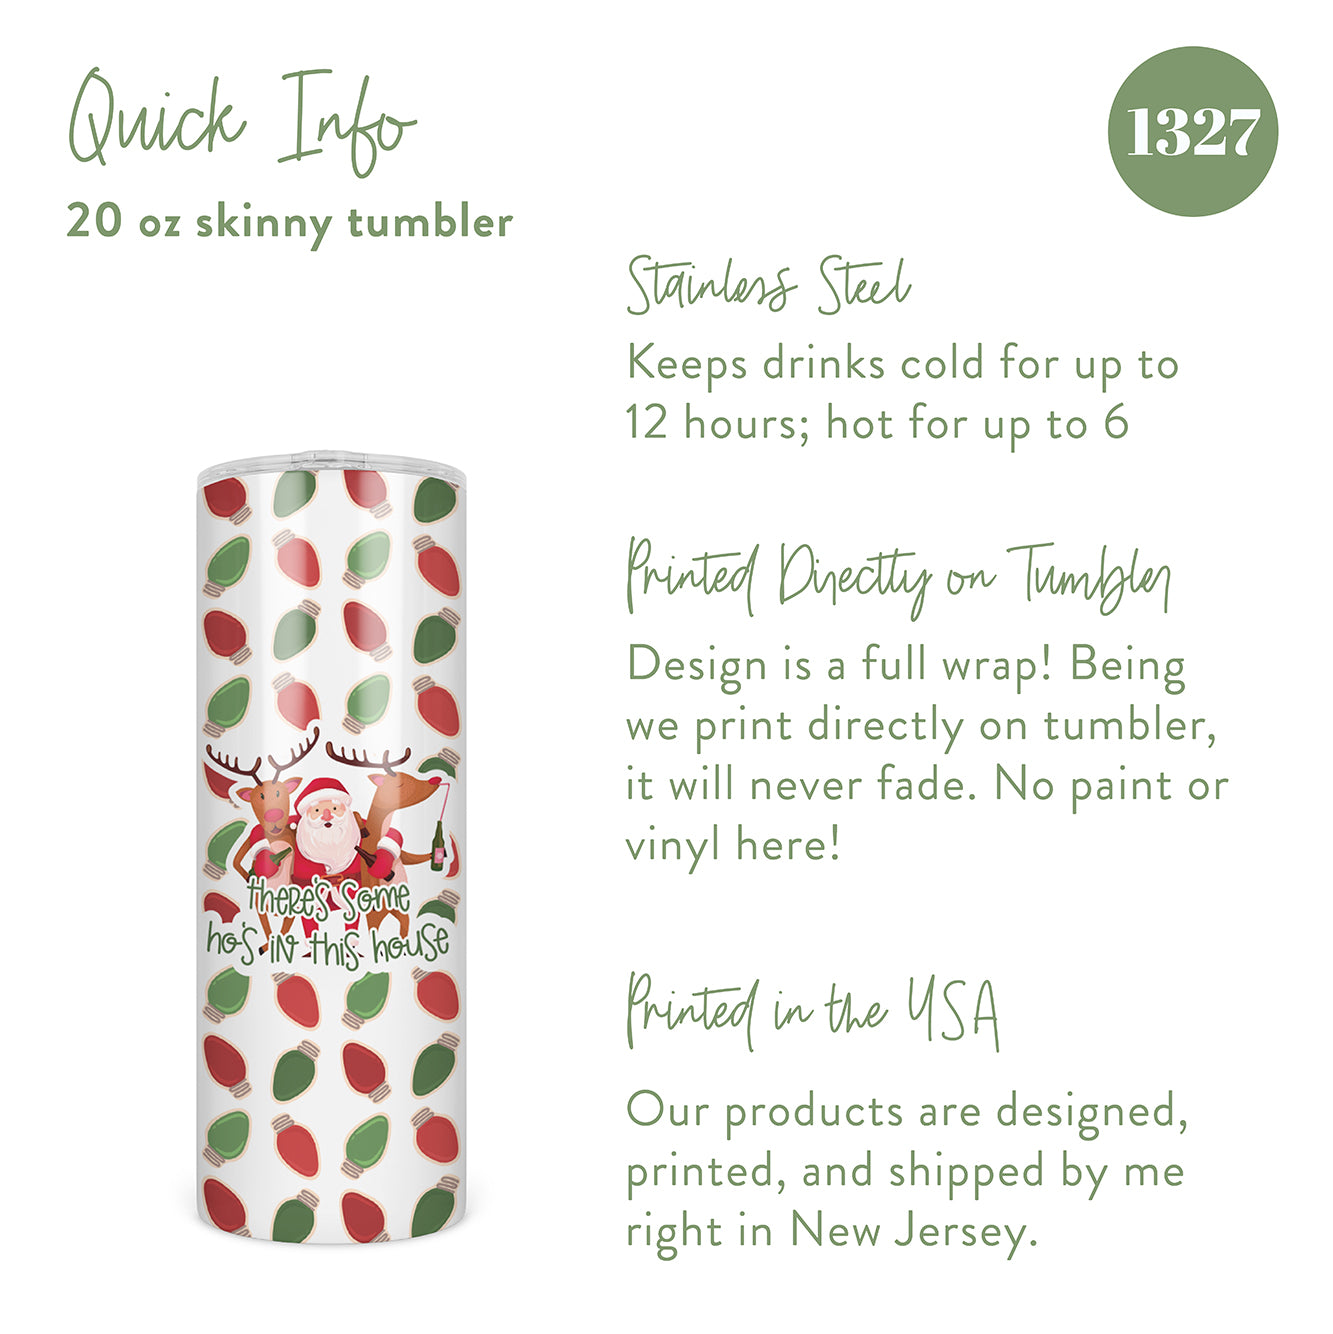 There's Some Ho's in This House Full Wrap Skinny Tumbler